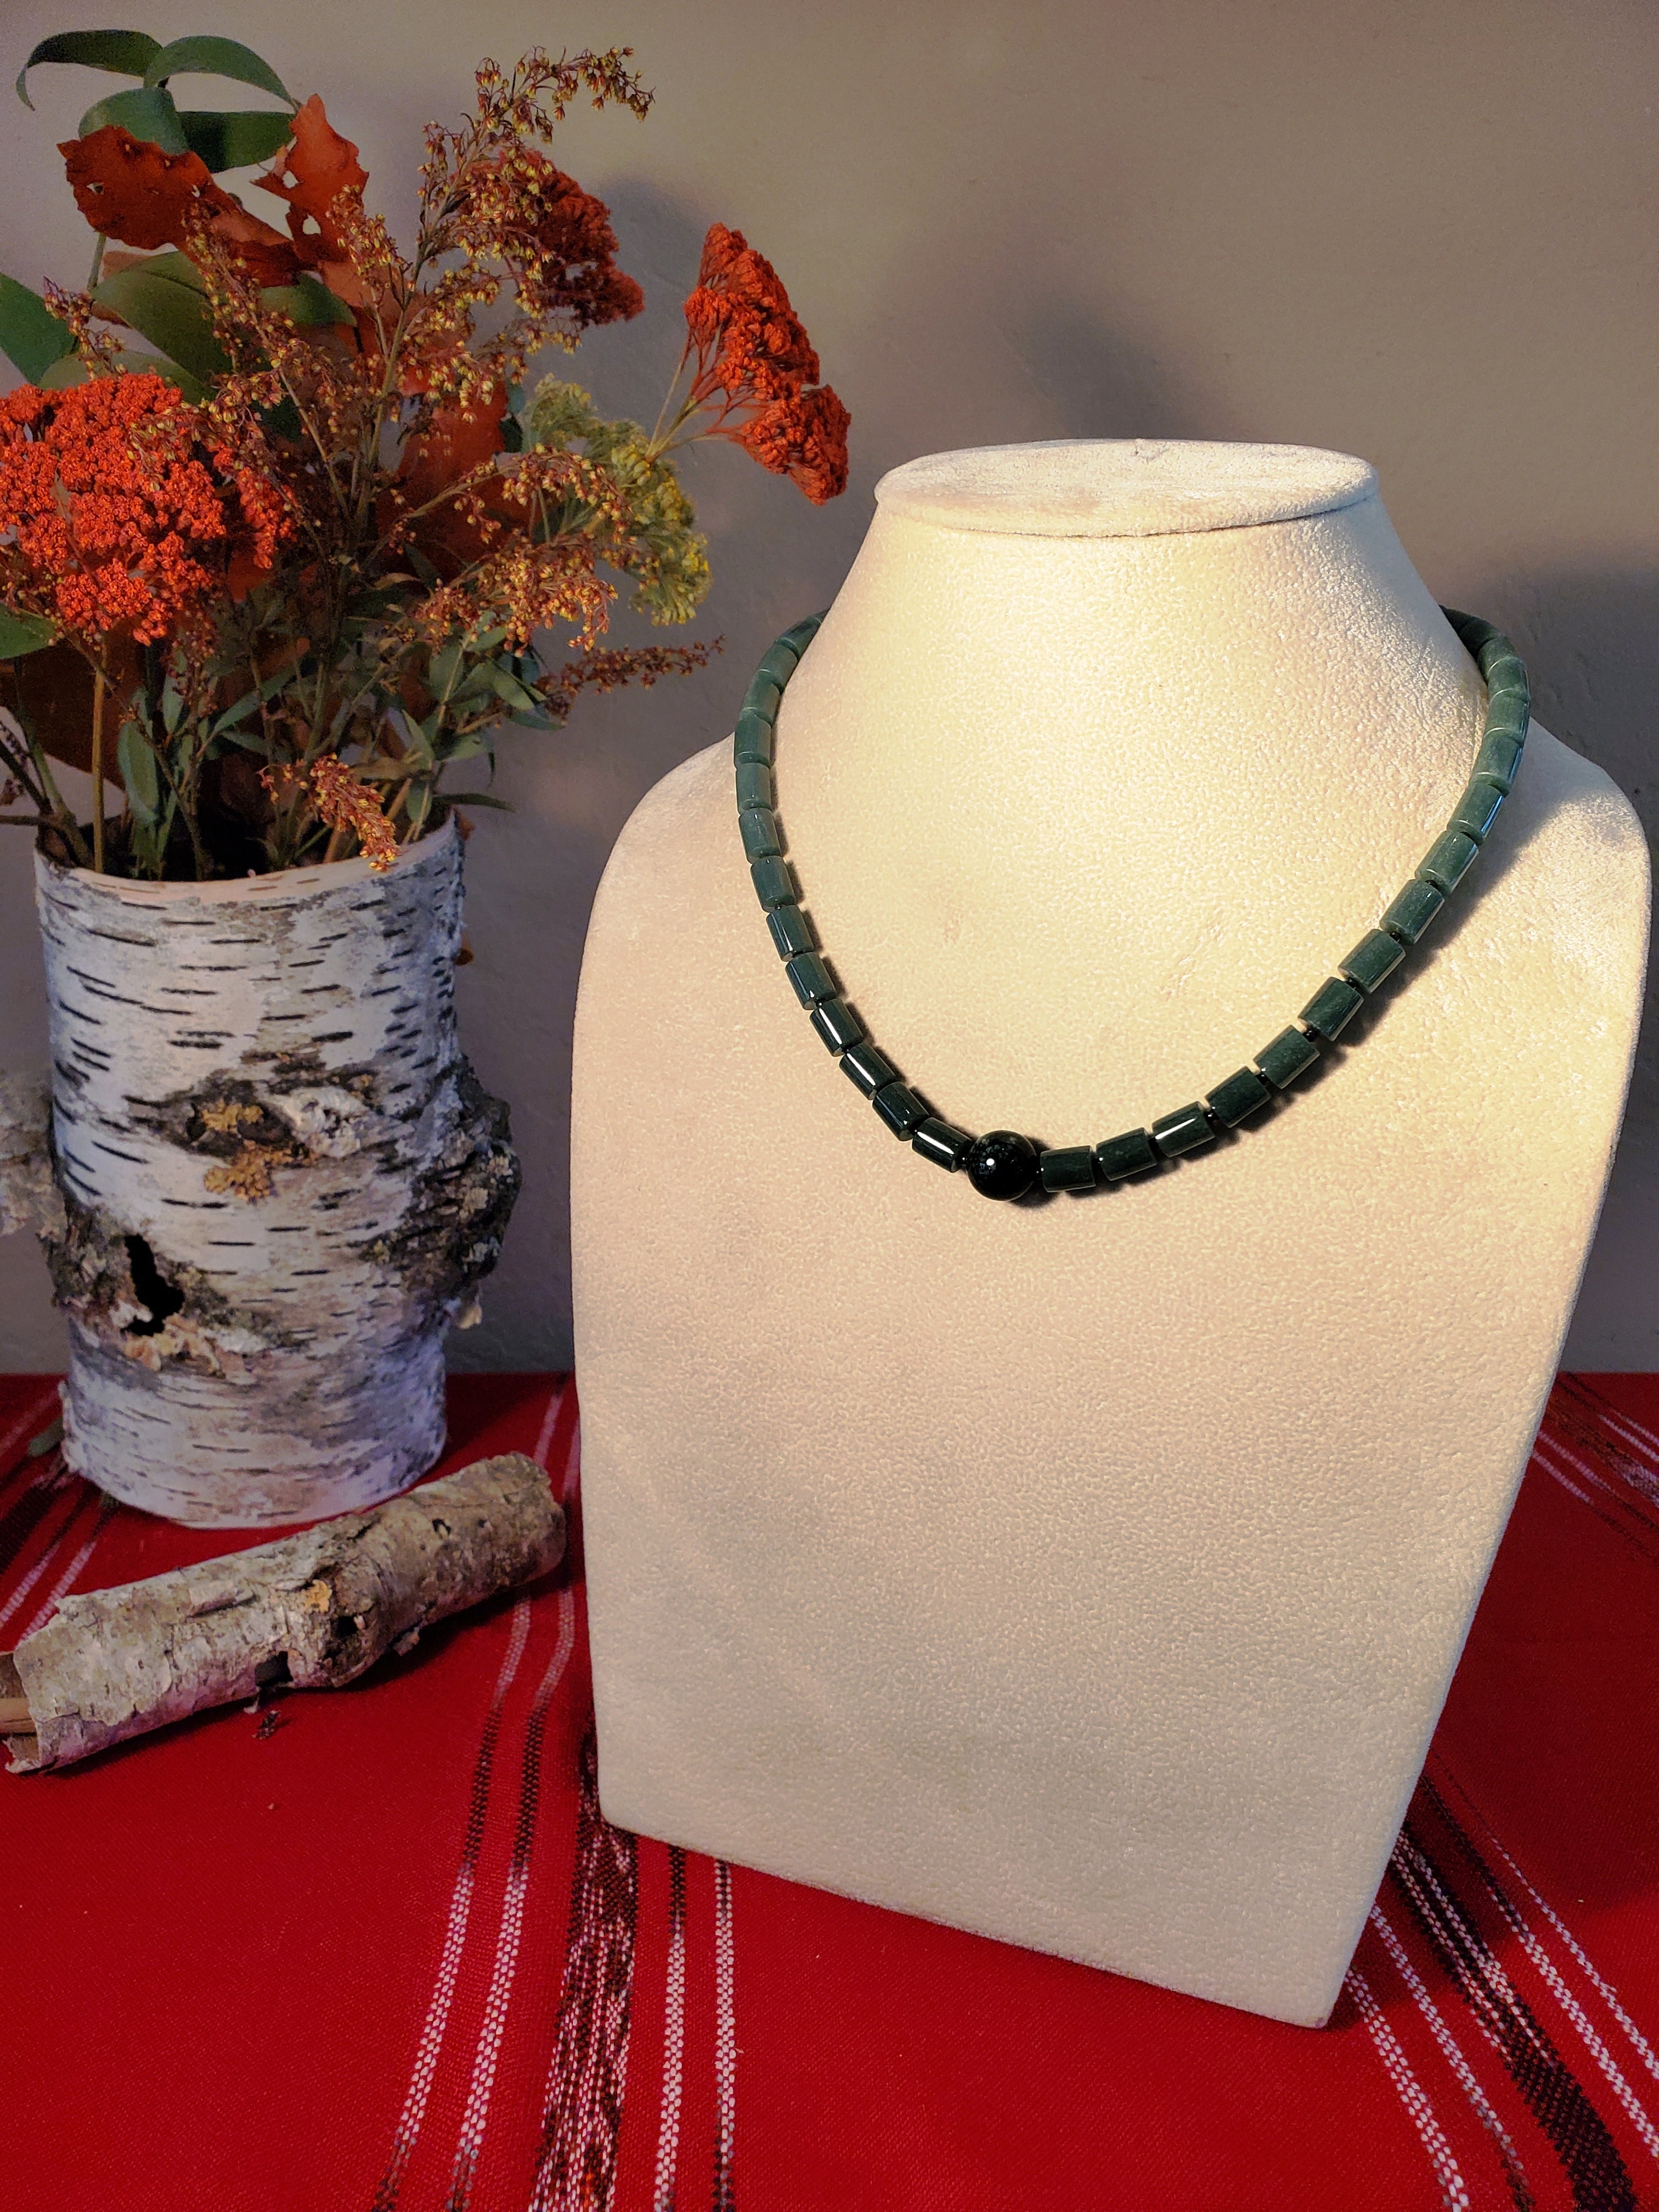 Emerald 2.5-9mm Smooth Rondelle 23 Inch. Beads Necklace - 144.35 Cts.